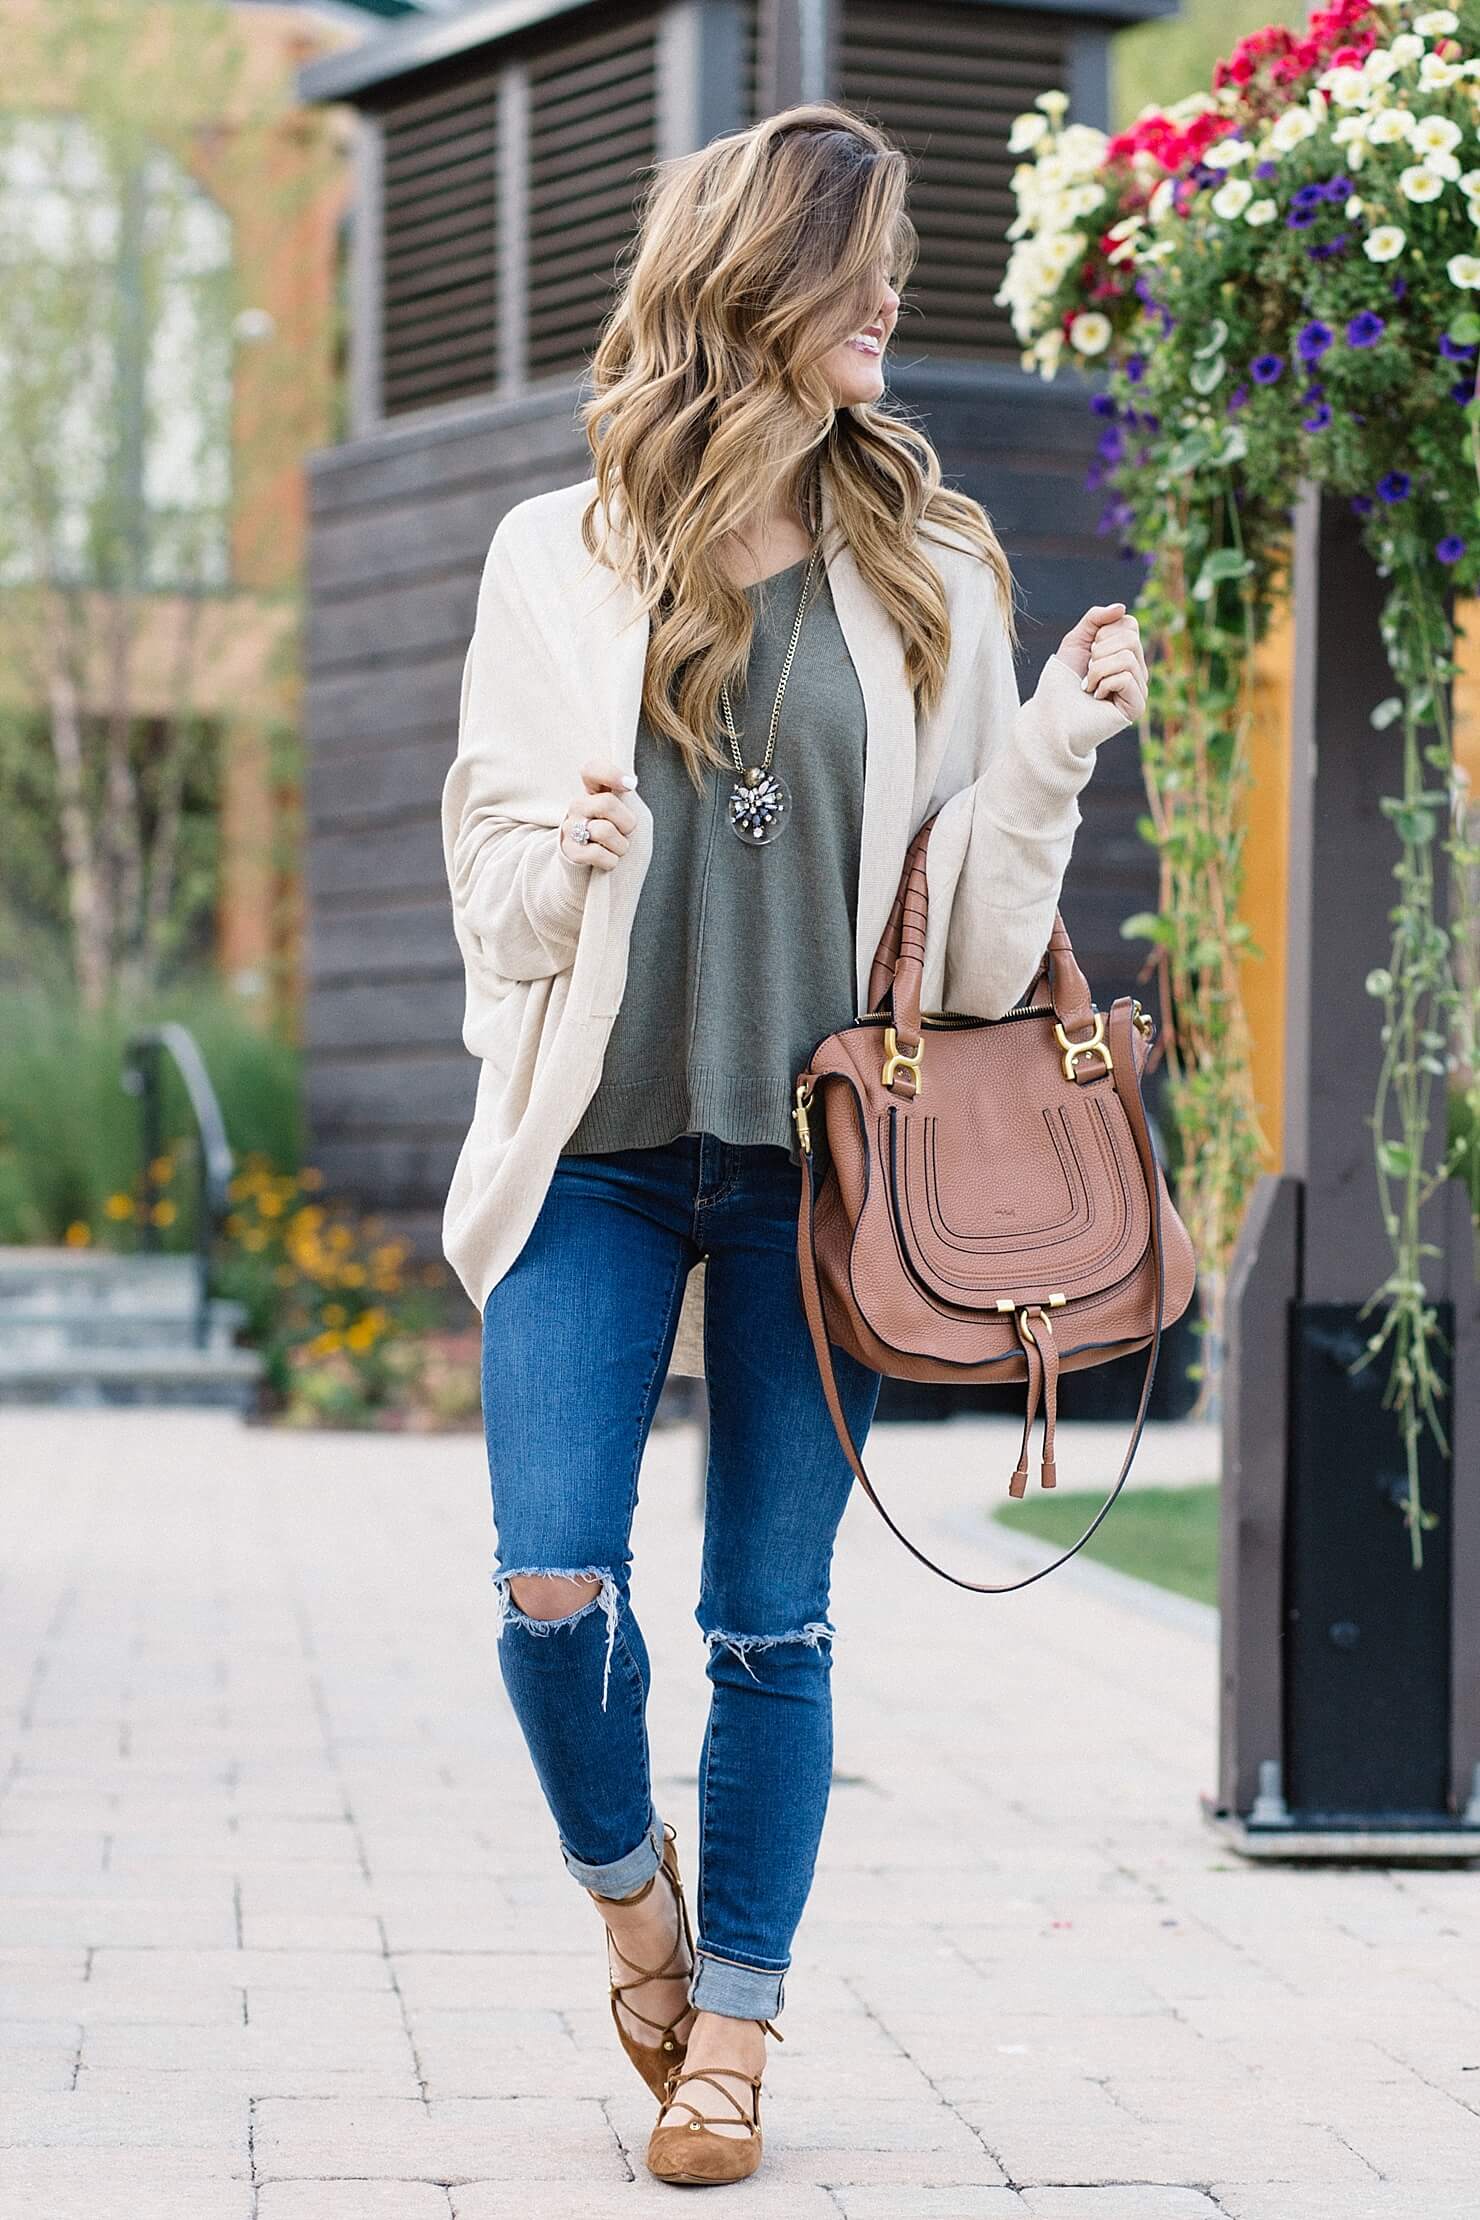 Pin on Fall outfits with jeans purses